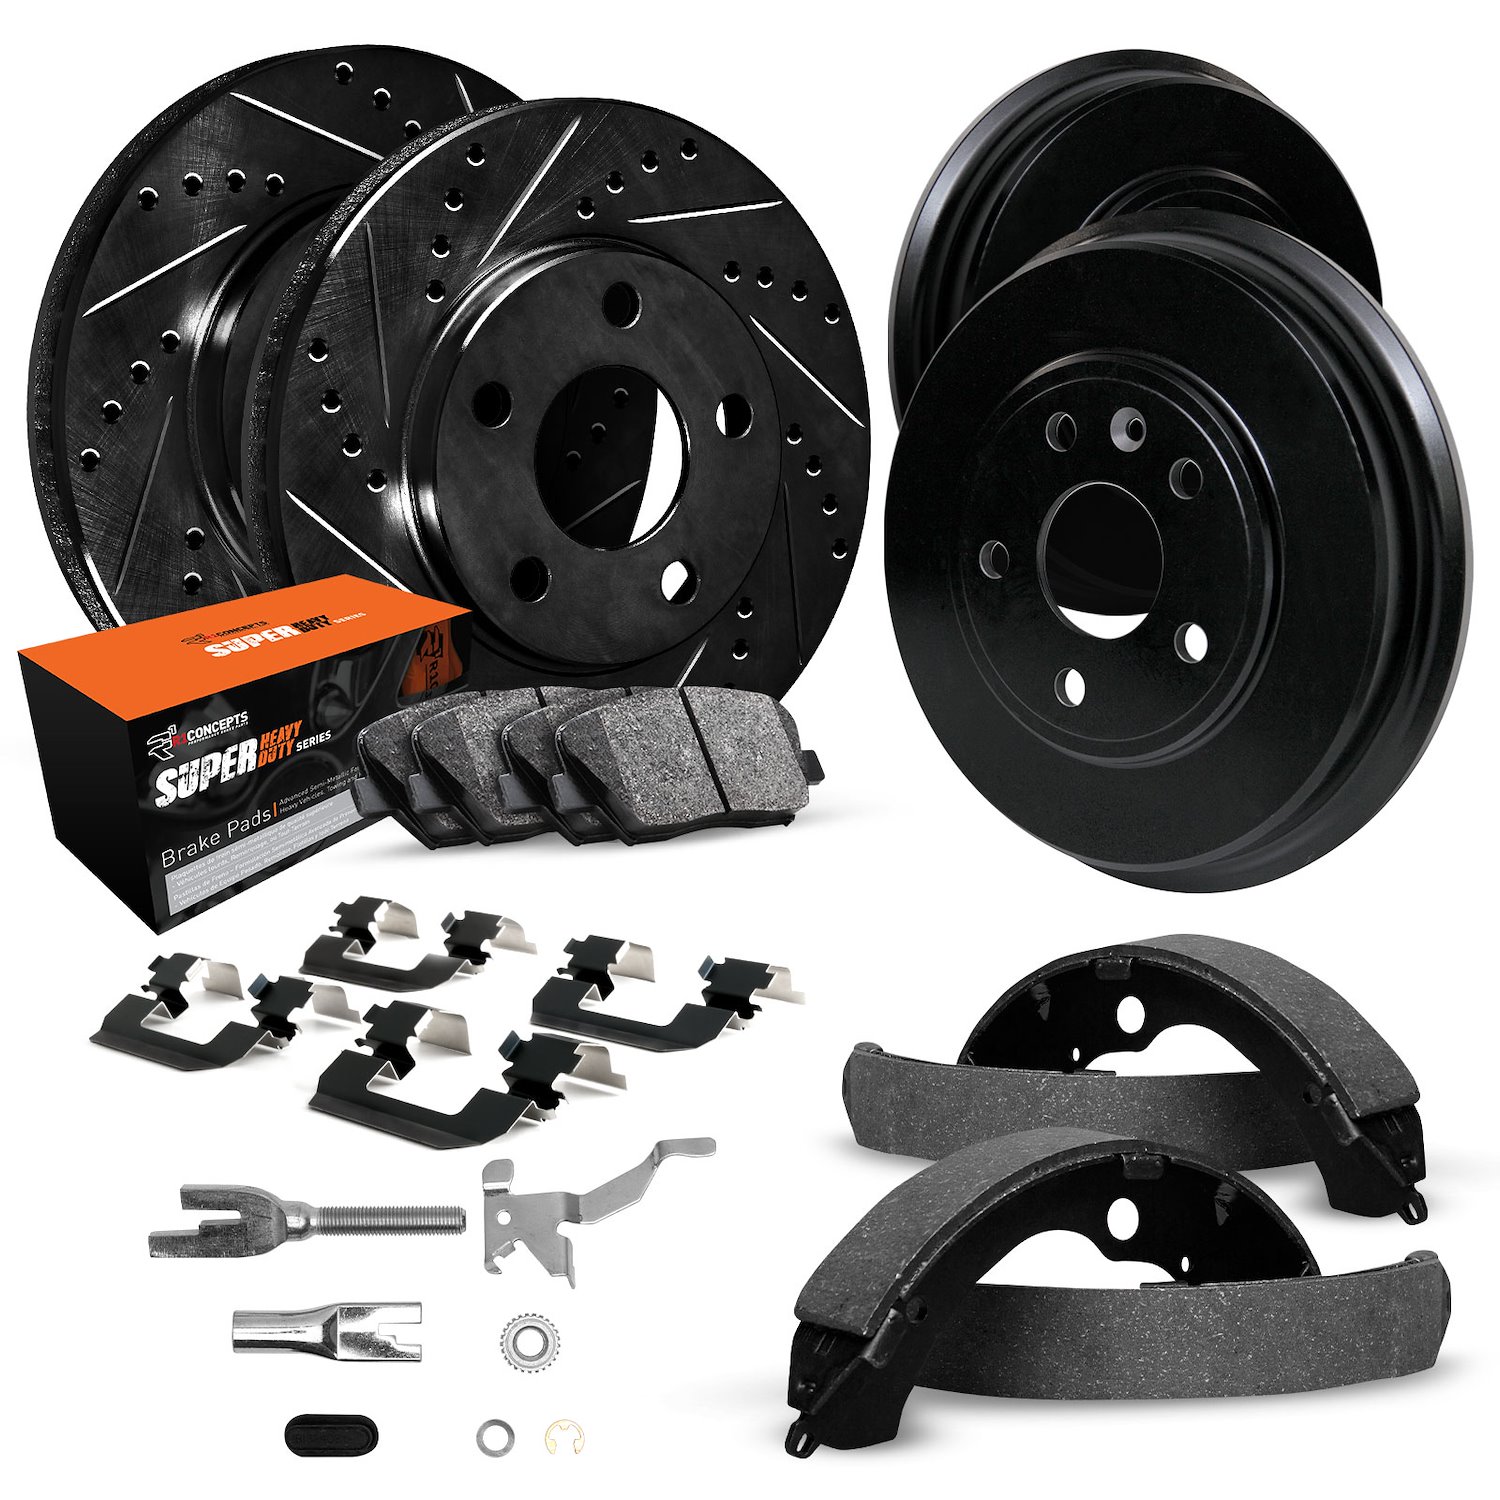 E-Line Drilled/Slotted Black Rotor & Drum Set w/Super-Duty Pads, Shoes, Hardware/Adjusters, 1977-1991 GM